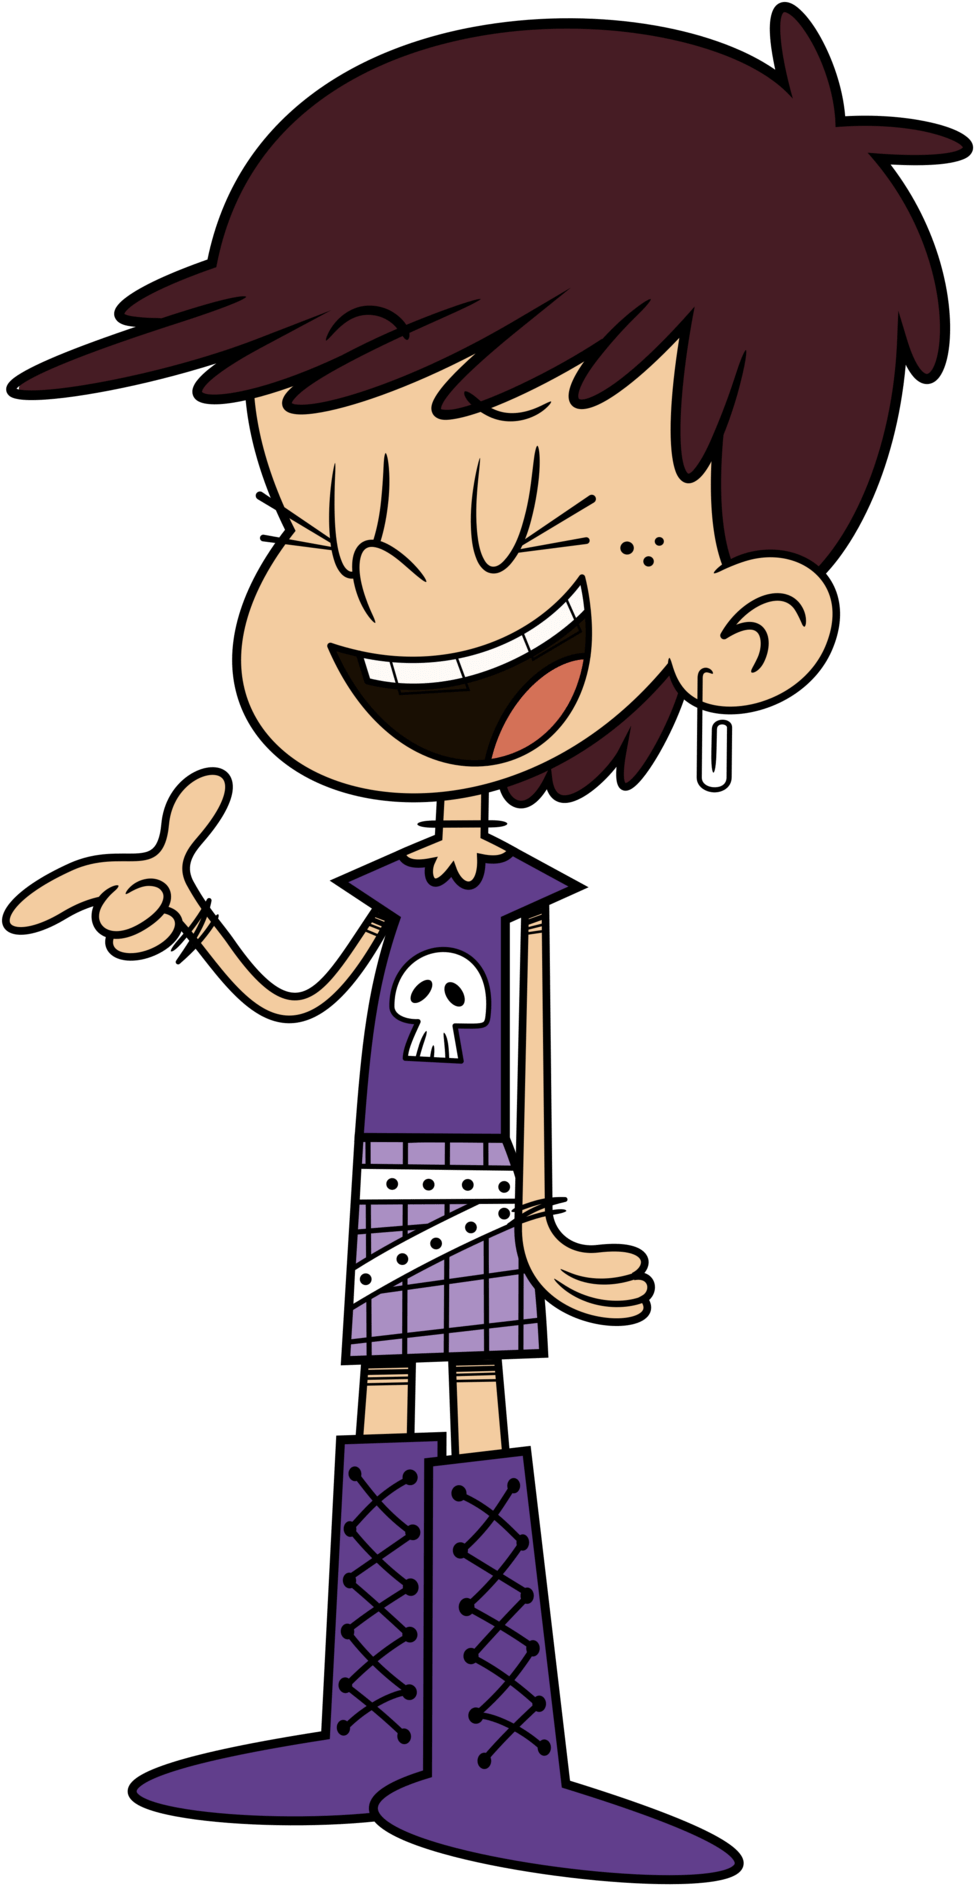 Download PNG image - The Loud House PNG Free Download 